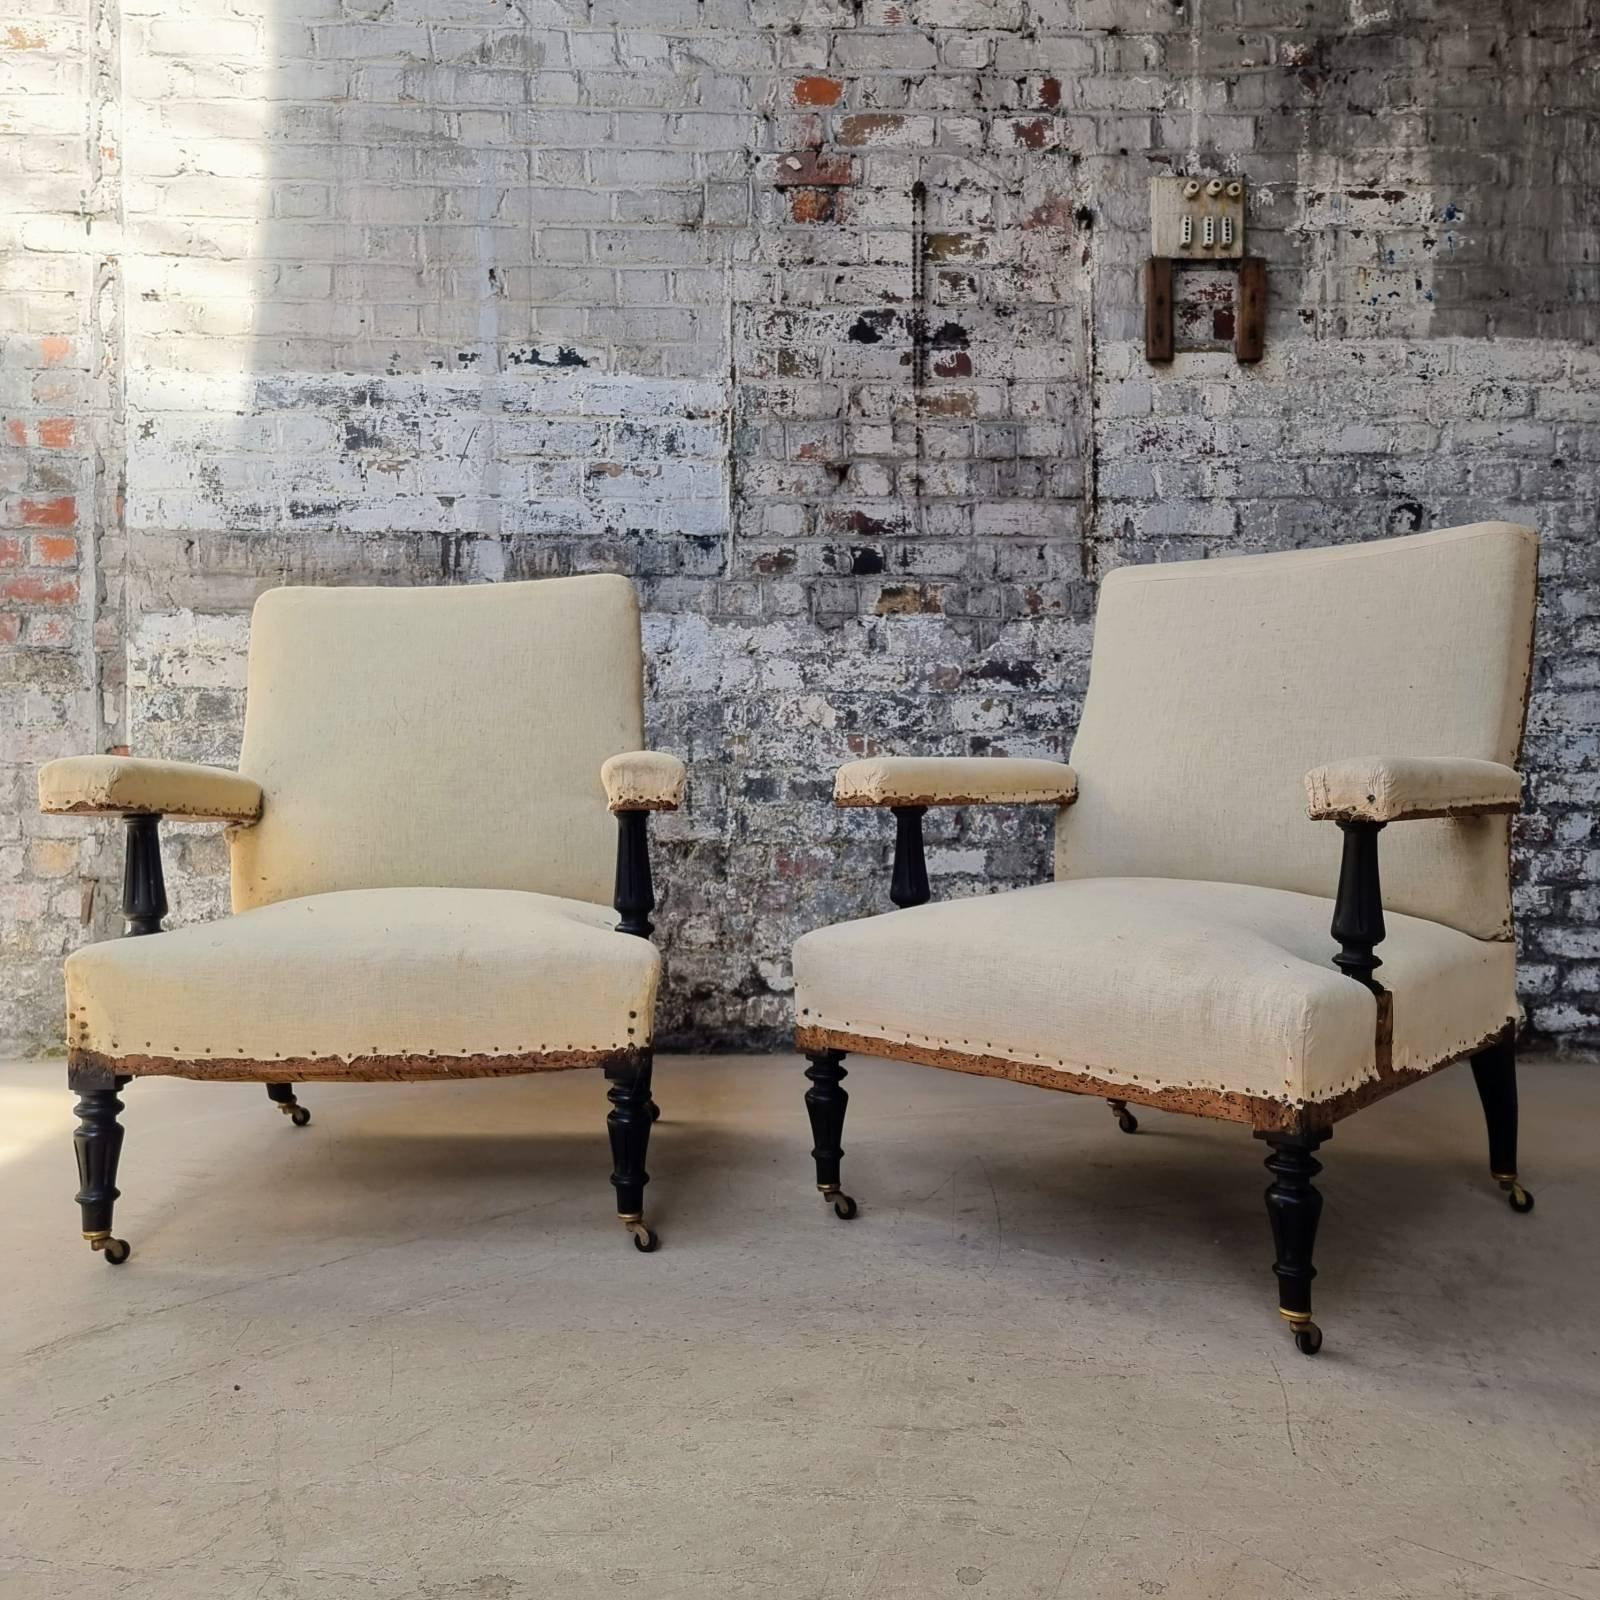 An unusual pair of French Napoleon III armchairs having exposed wooden arms and classic turned legs. The large seat and back make these chairs very comfortable. The chairs have been stripped down to the muslin, but are ready to be upholstered. We